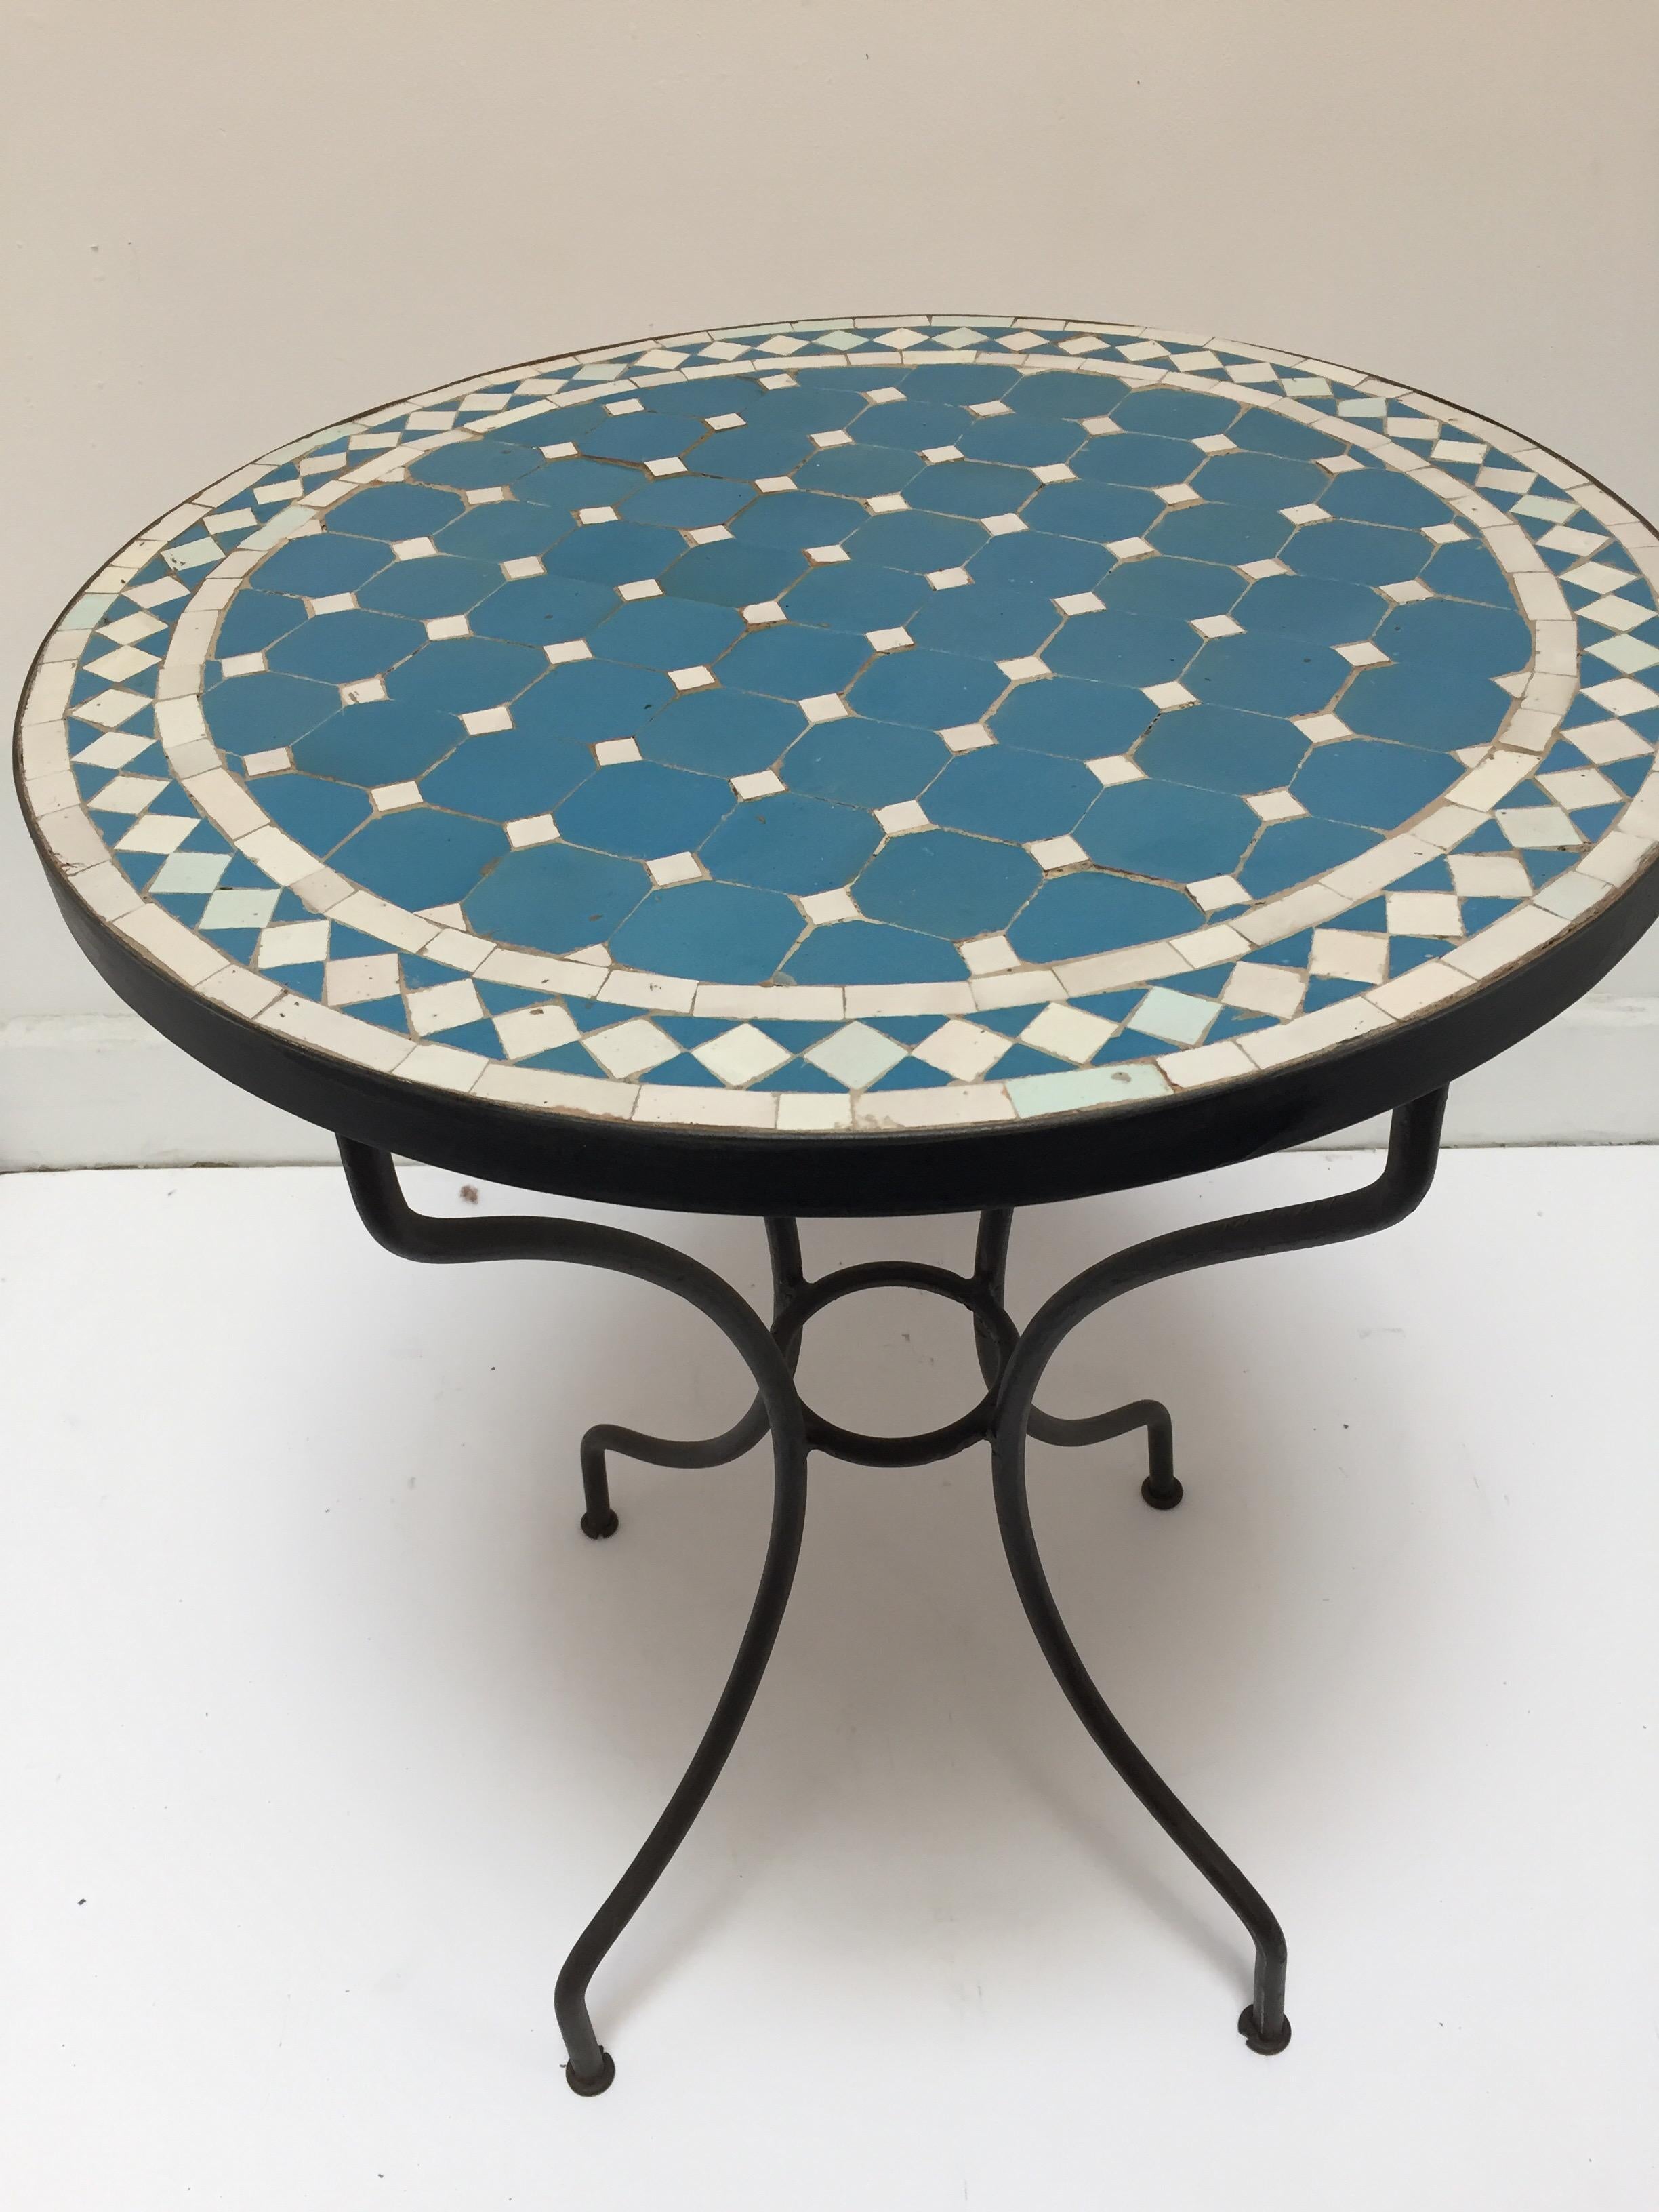 Moroccan mosaic tile bistro table on iron base.
Handmade by expert artisans in Fez, Morocco using reclaimed old glazed blue and tan tiles inlaid in concrete using reclaimed old glazed tiles and making beautiful geometrical designs, colors are